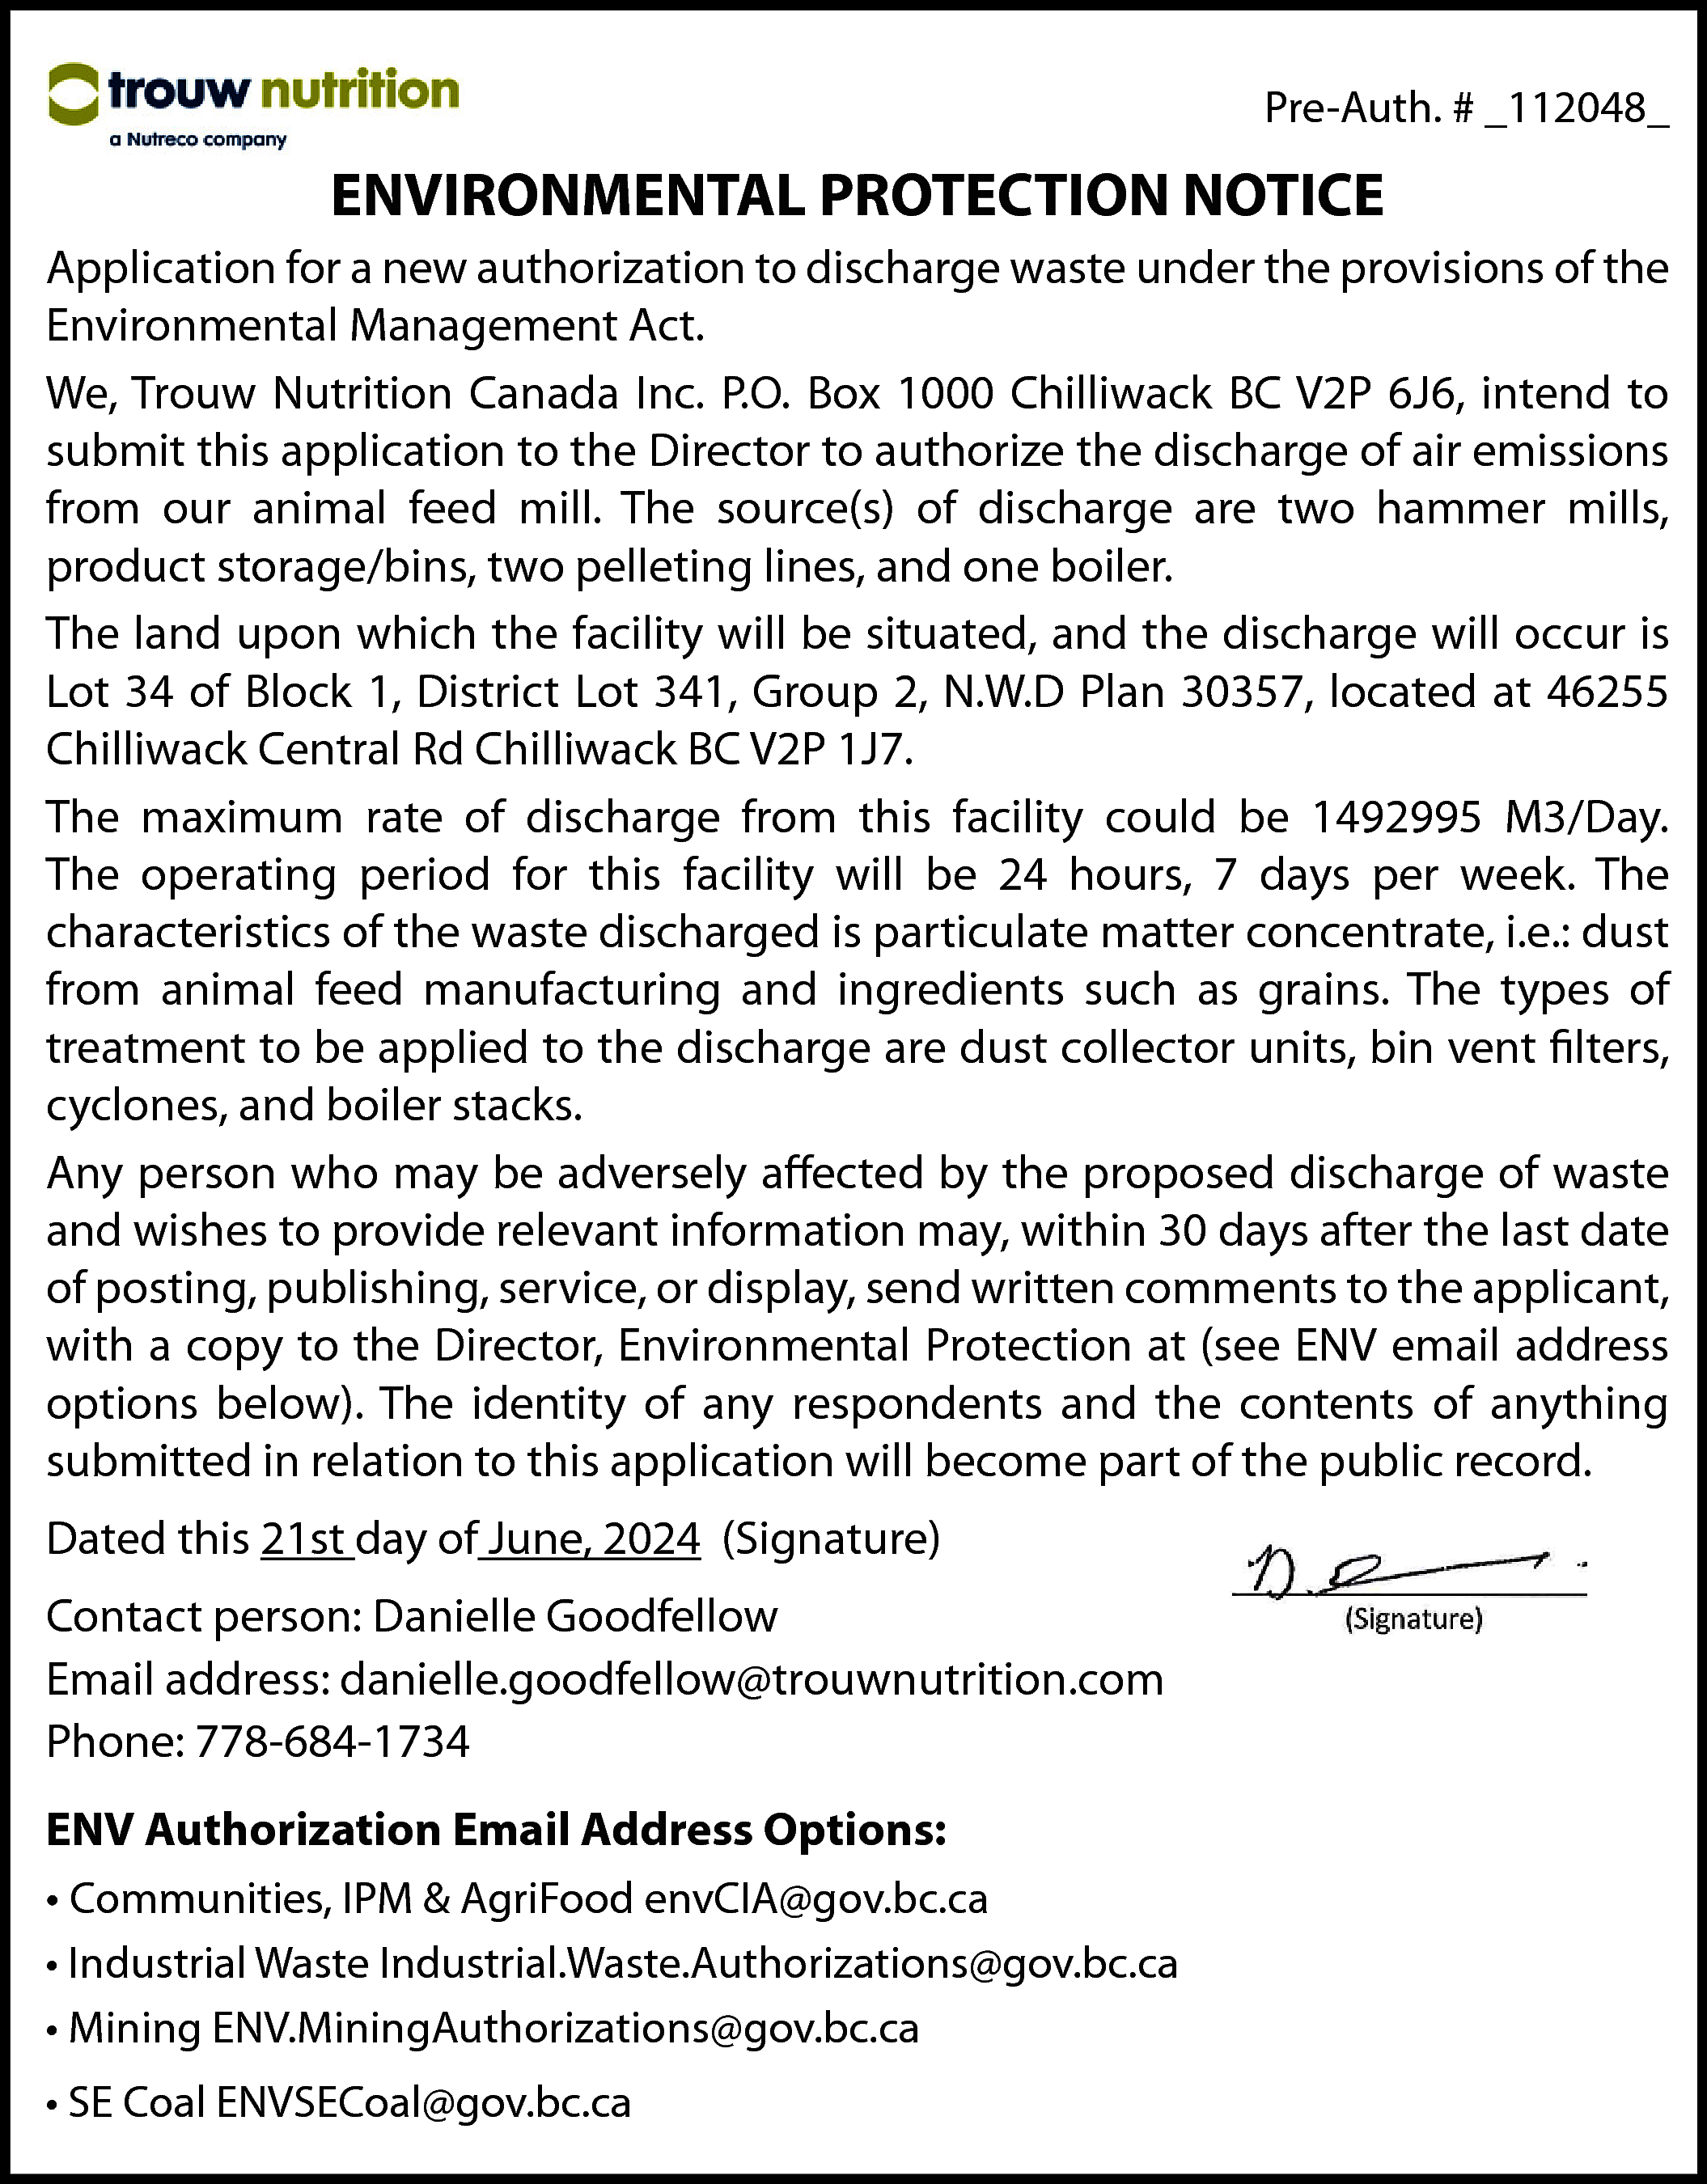 Pre-Auth. # _112048_ <br> <br>ENVIRONMENTAL  Pre-Auth. # _112048_    ENVIRONMENTAL PROTECTION NOTICE  Application for a new authorization to discharge waste under the provisions of the  Environmental Management Act.  We, Trouw Nutrition Canada Inc. P.O. Box 1000 Chilliwack BC V2P 6J6, intend to  submit this application to the Director to authorize the discharge of air emissions  from our animal feed mill. The source(s) of discharge are two hammer mills,  product storage/bins, two pelleting lines, and one boiler.  The land upon which the facility will be situated, and the discharge will occur is  Lot 34 of Block 1, District Lot 341, Group 2, N.W.D Plan 30357, located at 46255  Chilliwack Central Rd Chilliwack BC V2P 1J7.  The maximum rate of discharge from this facility could be 1492995 M3/Day.  The operating period for this facility will be 24 hours, 7 days per week. The  characteristics of the waste discharged is particulate matter concentrate, i.e.: dust  from animal feed manufacturing and ingredients such as grains. The types of  treatment to be applied to the discharge are dust collector units, bin vent filters,  cyclones, and boiler stacks.  Any person who may be adversely affected by the proposed discharge of waste  and wishes to provide relevant information may, within 30 days after the last date  of posting, publishing, service, or display, send written comments to the applicant,  with a copy to the Director, Environmental Protection at (see ENV email address  options below). The identity of any respondents and the contents of anything  submitted in relation to this application will become part of the public record.  Dated this 21st day of June, 2024 (Signature)  Contact person: Danielle Goodfellow  Email address: danielle.goodfellow@trouwnutrition.com  Phone: 778-684-1734  ENV Authorization Email Address Options:  • Communities, IPM & AgriFood envCIA@gov.bc.ca  • Industrial Waste Industrial.Waste.Authorizations@gov.bc.ca  • Mining ENV.MiningAuthorizations@gov.bc.ca  • SE Coal ENVSECoal@gov.bc.ca    